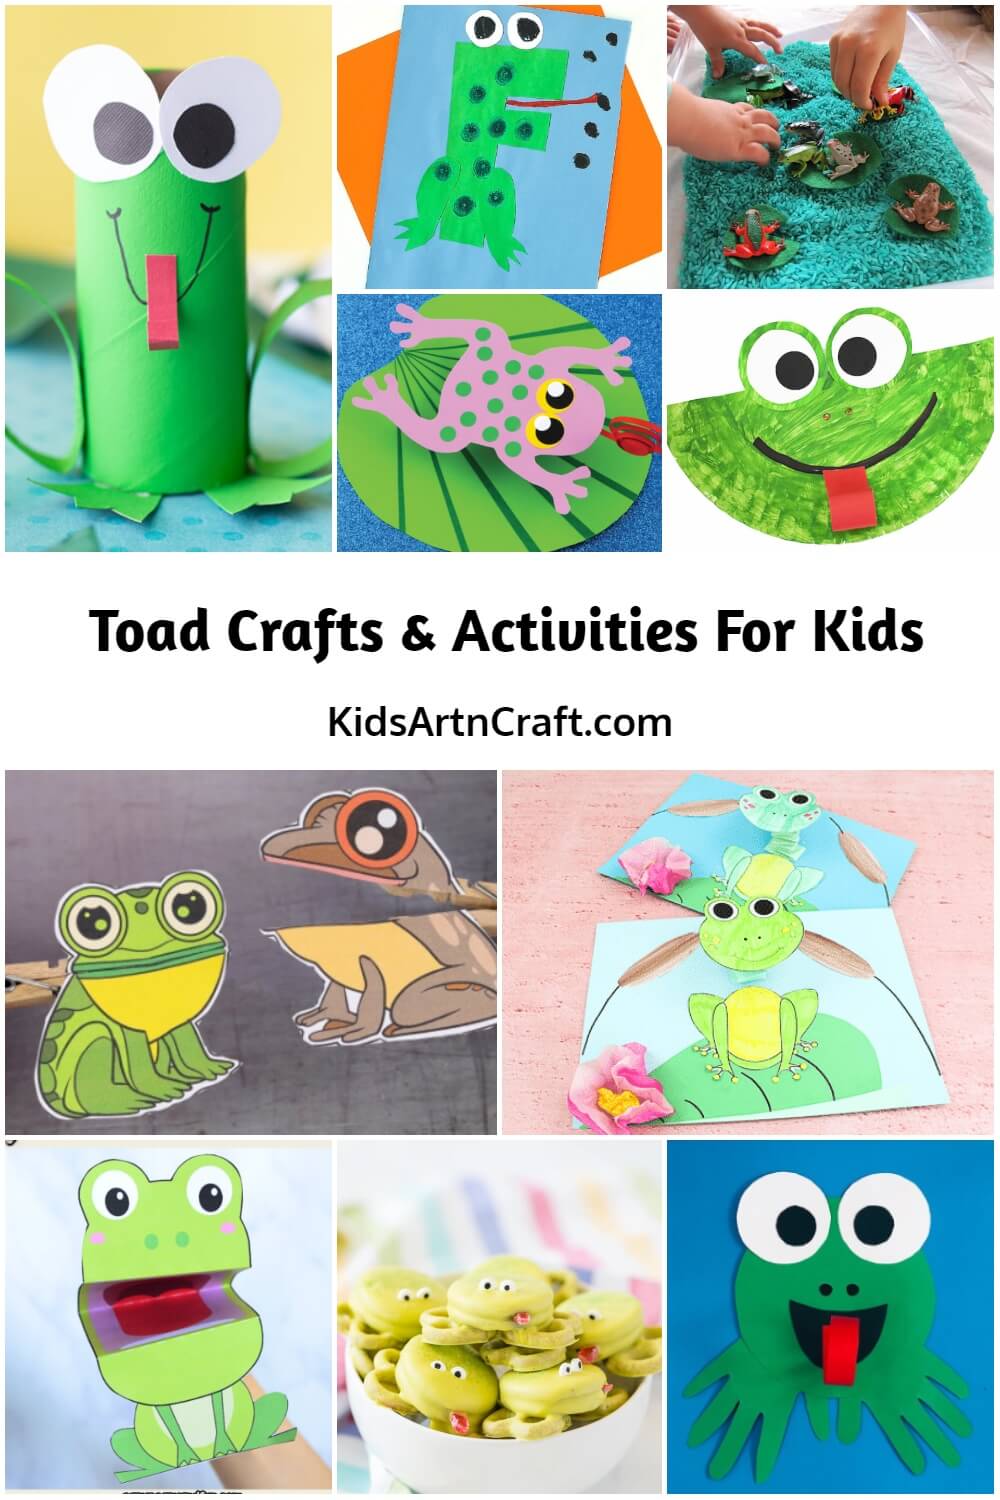 Toad Crafts & Activities for Kids